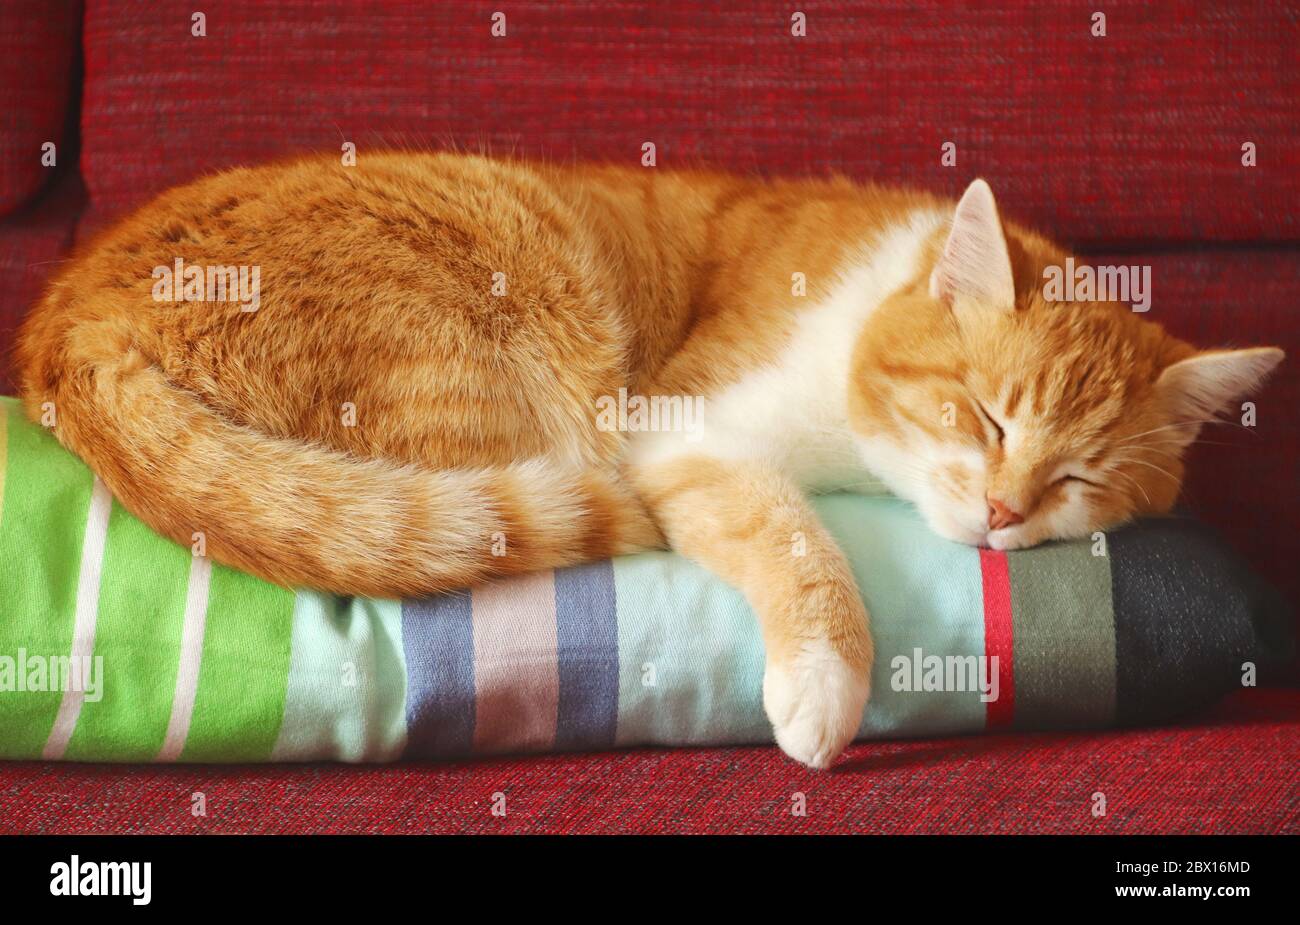 ginger cat sleeping or relaxing on a multi colored, striped cushion Stock Photo